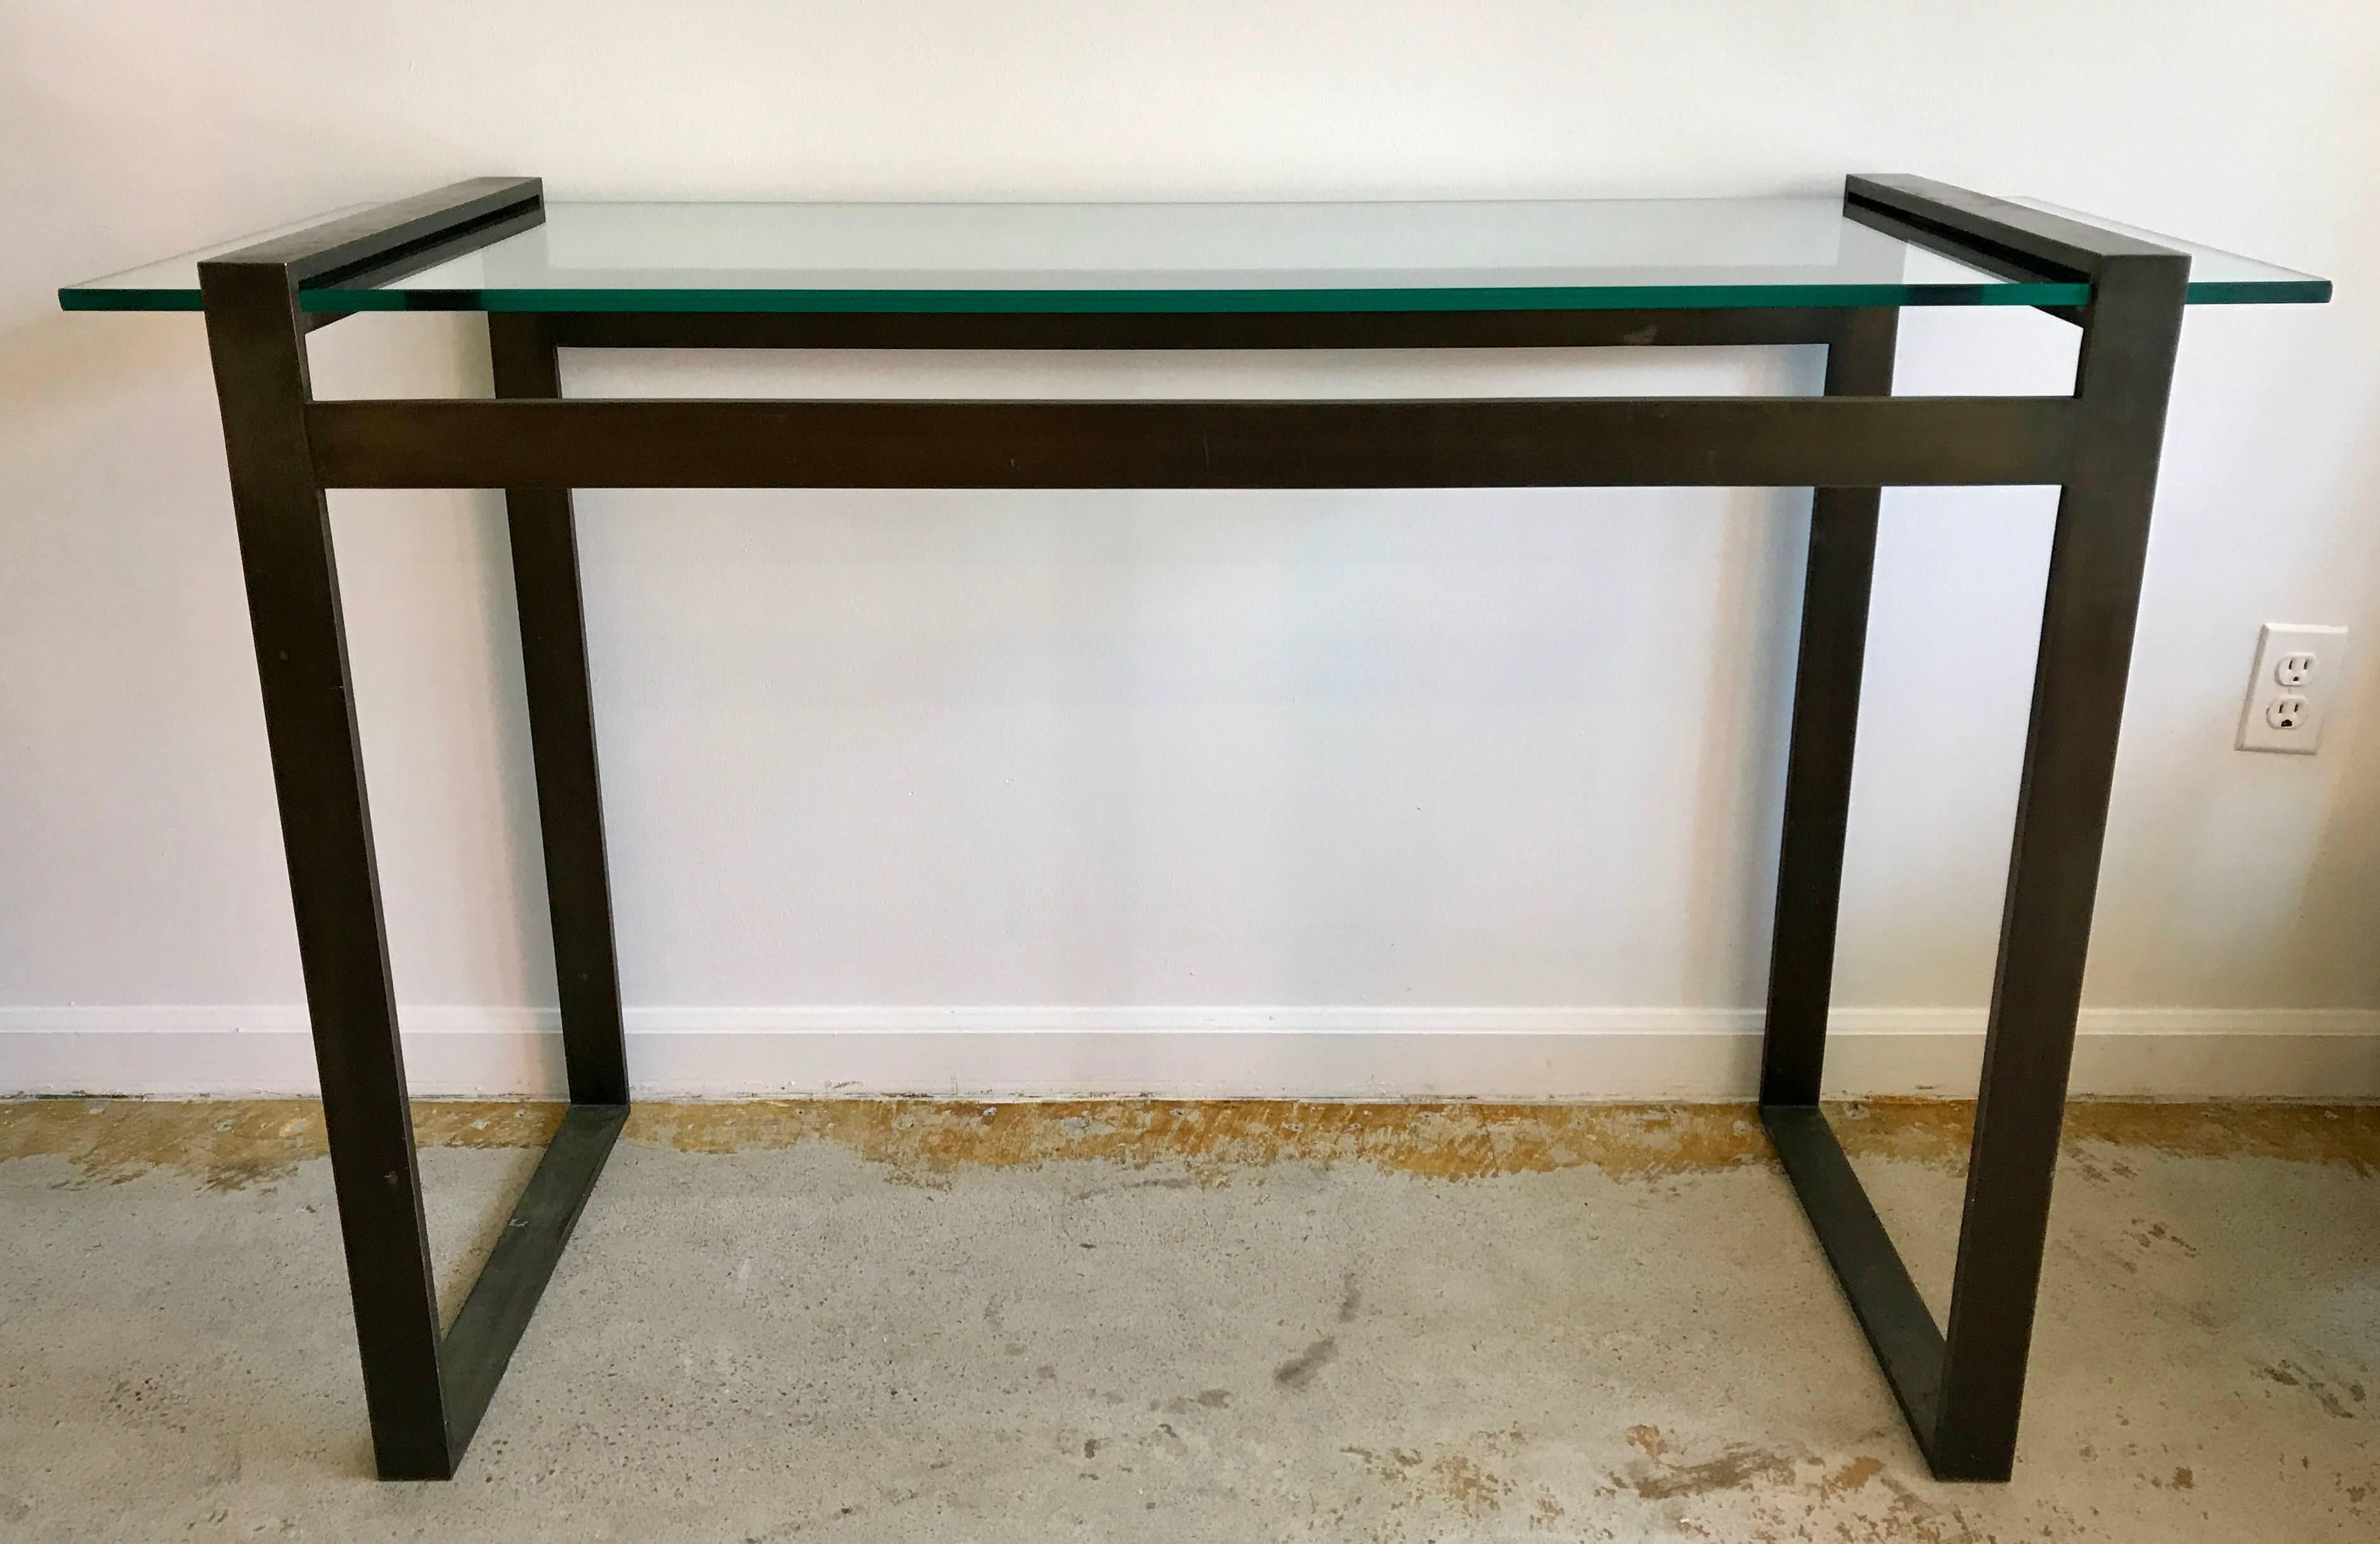 Amazing console or foyer table with bronze base and new floating glass top. The Box Line collection was designed by Charles Hollis Jones in the 1960s. The bronze base is very heavy and has a beautiful aged patina, new half inch glass.